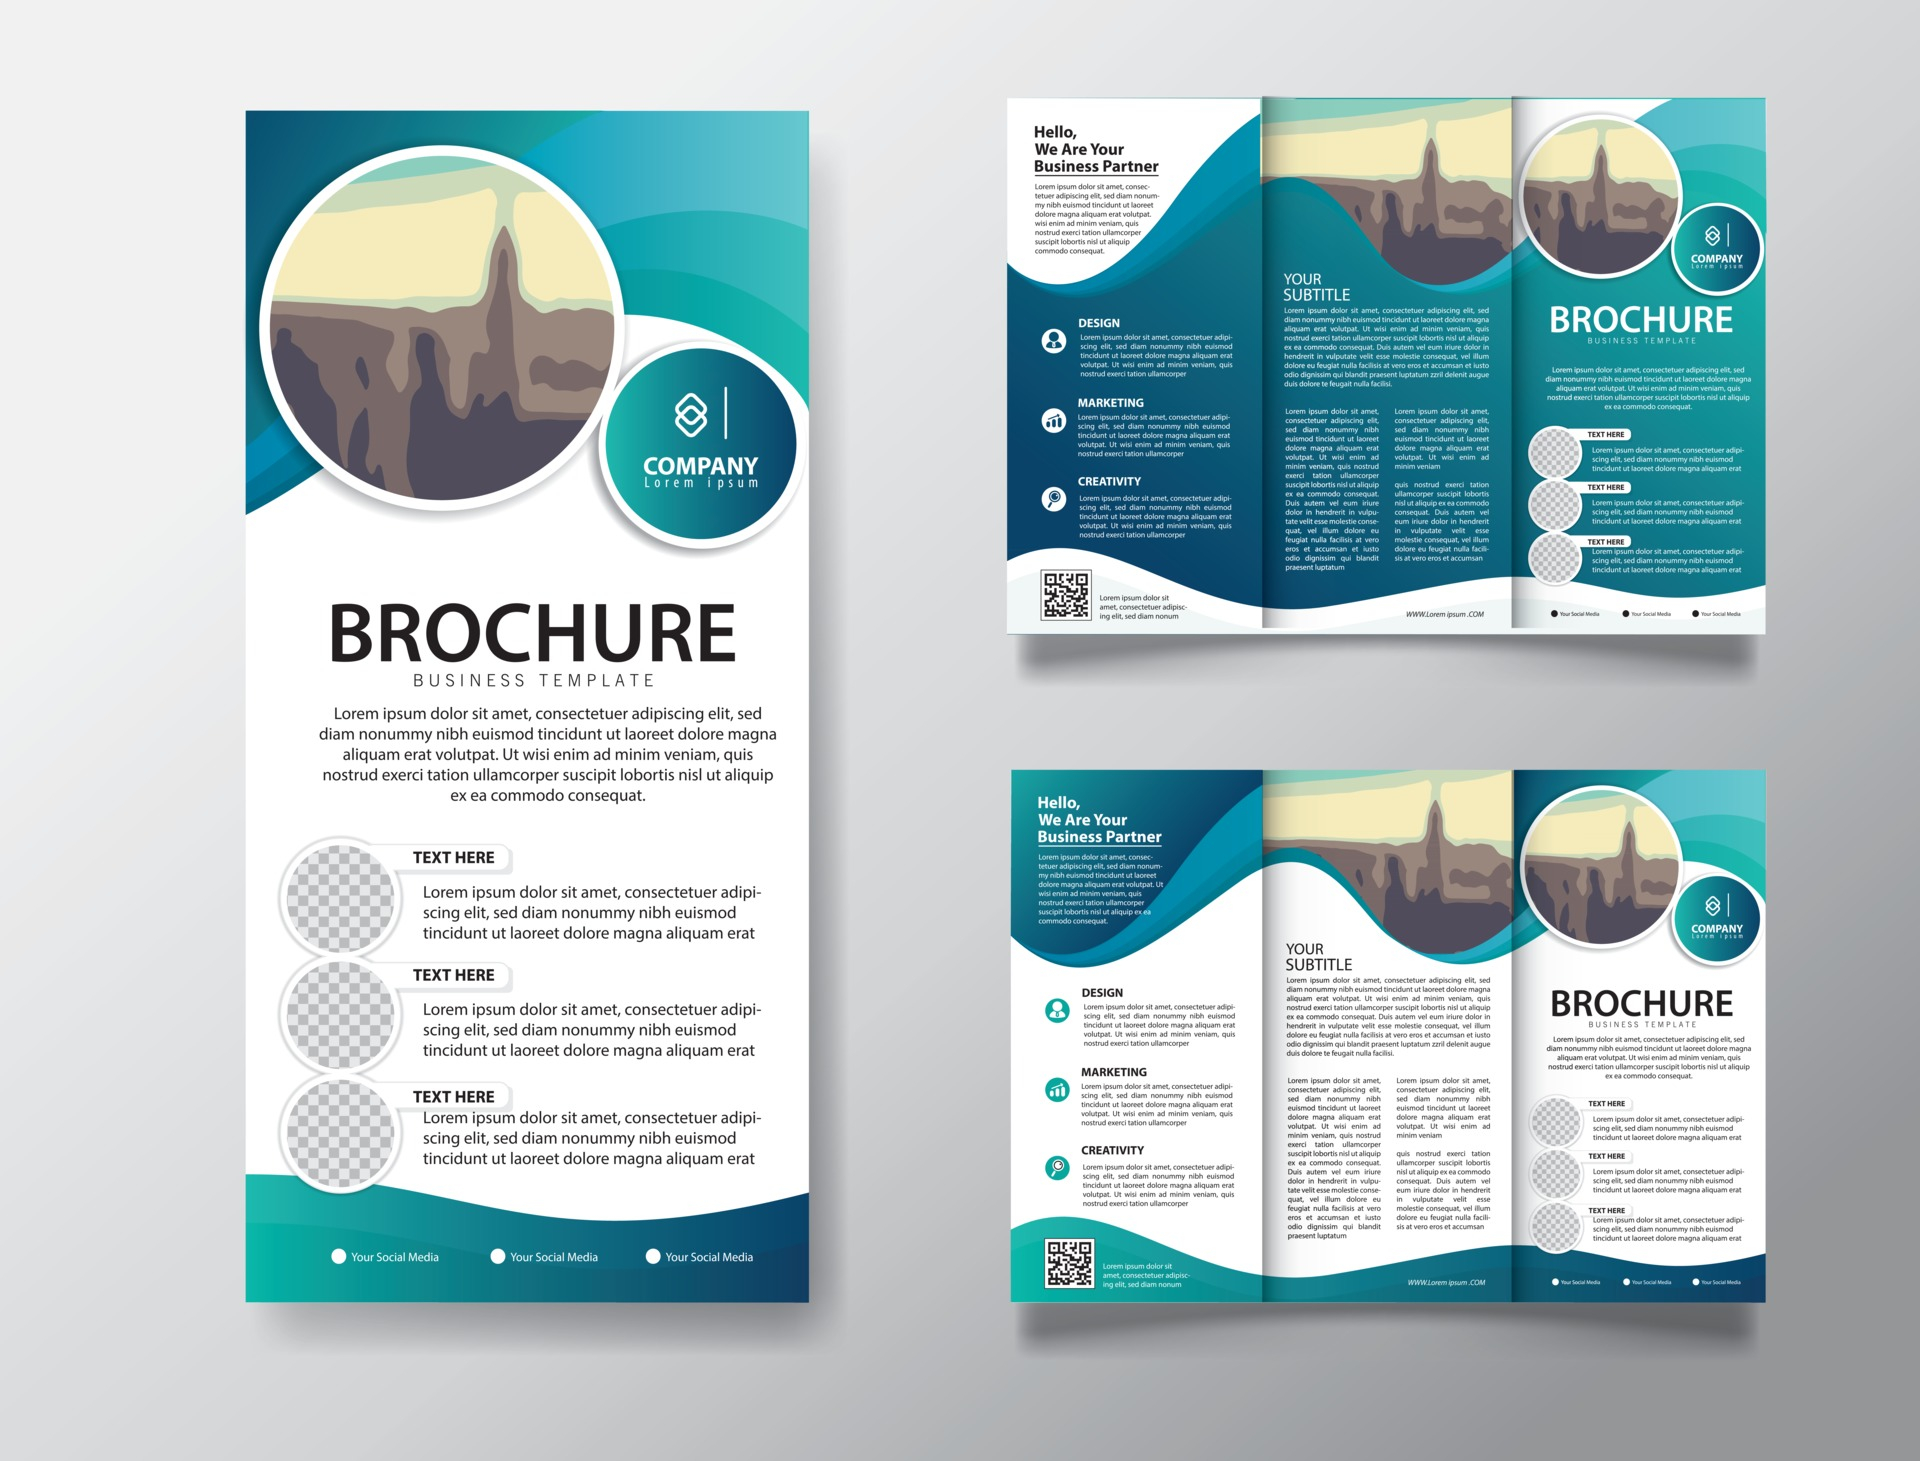 Brochure Vector Art, Icons, and Graphics for Free Download Regarding One Page Brochure Template